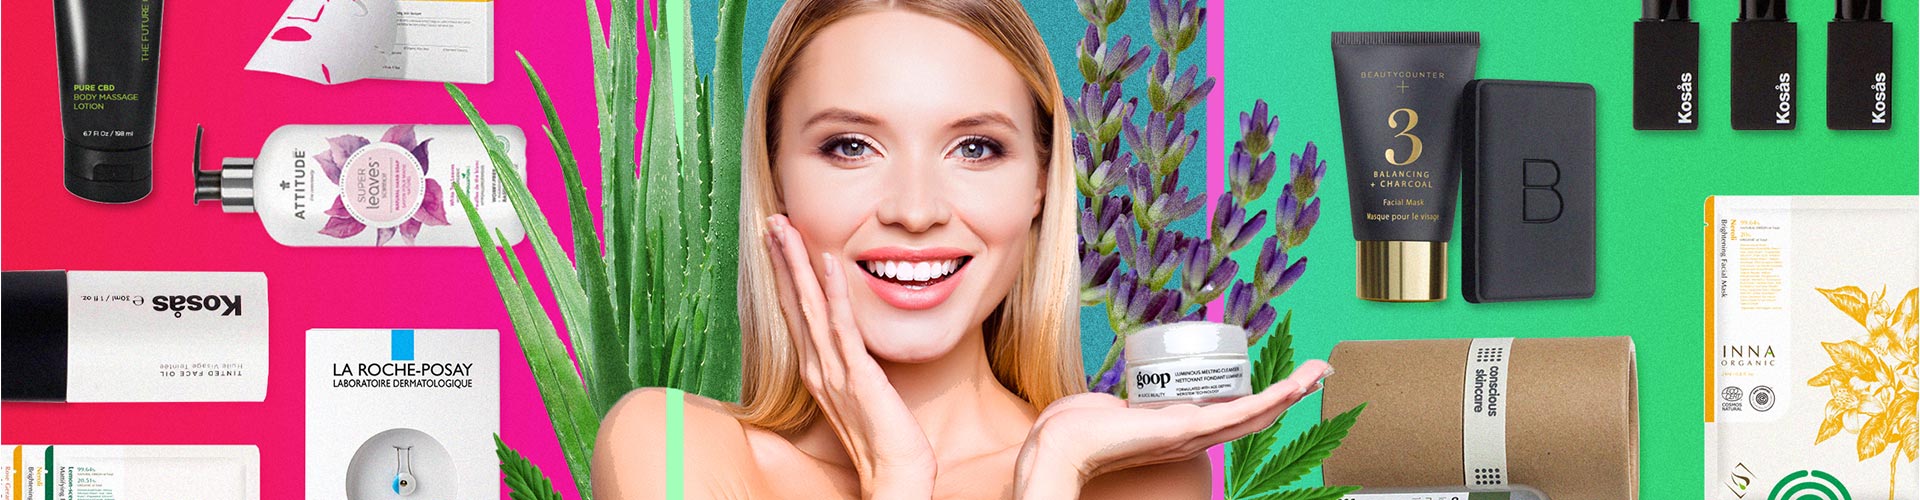 Blog banner featuring woman smiling with jarred beauty product in her hand and several other products around her in the background